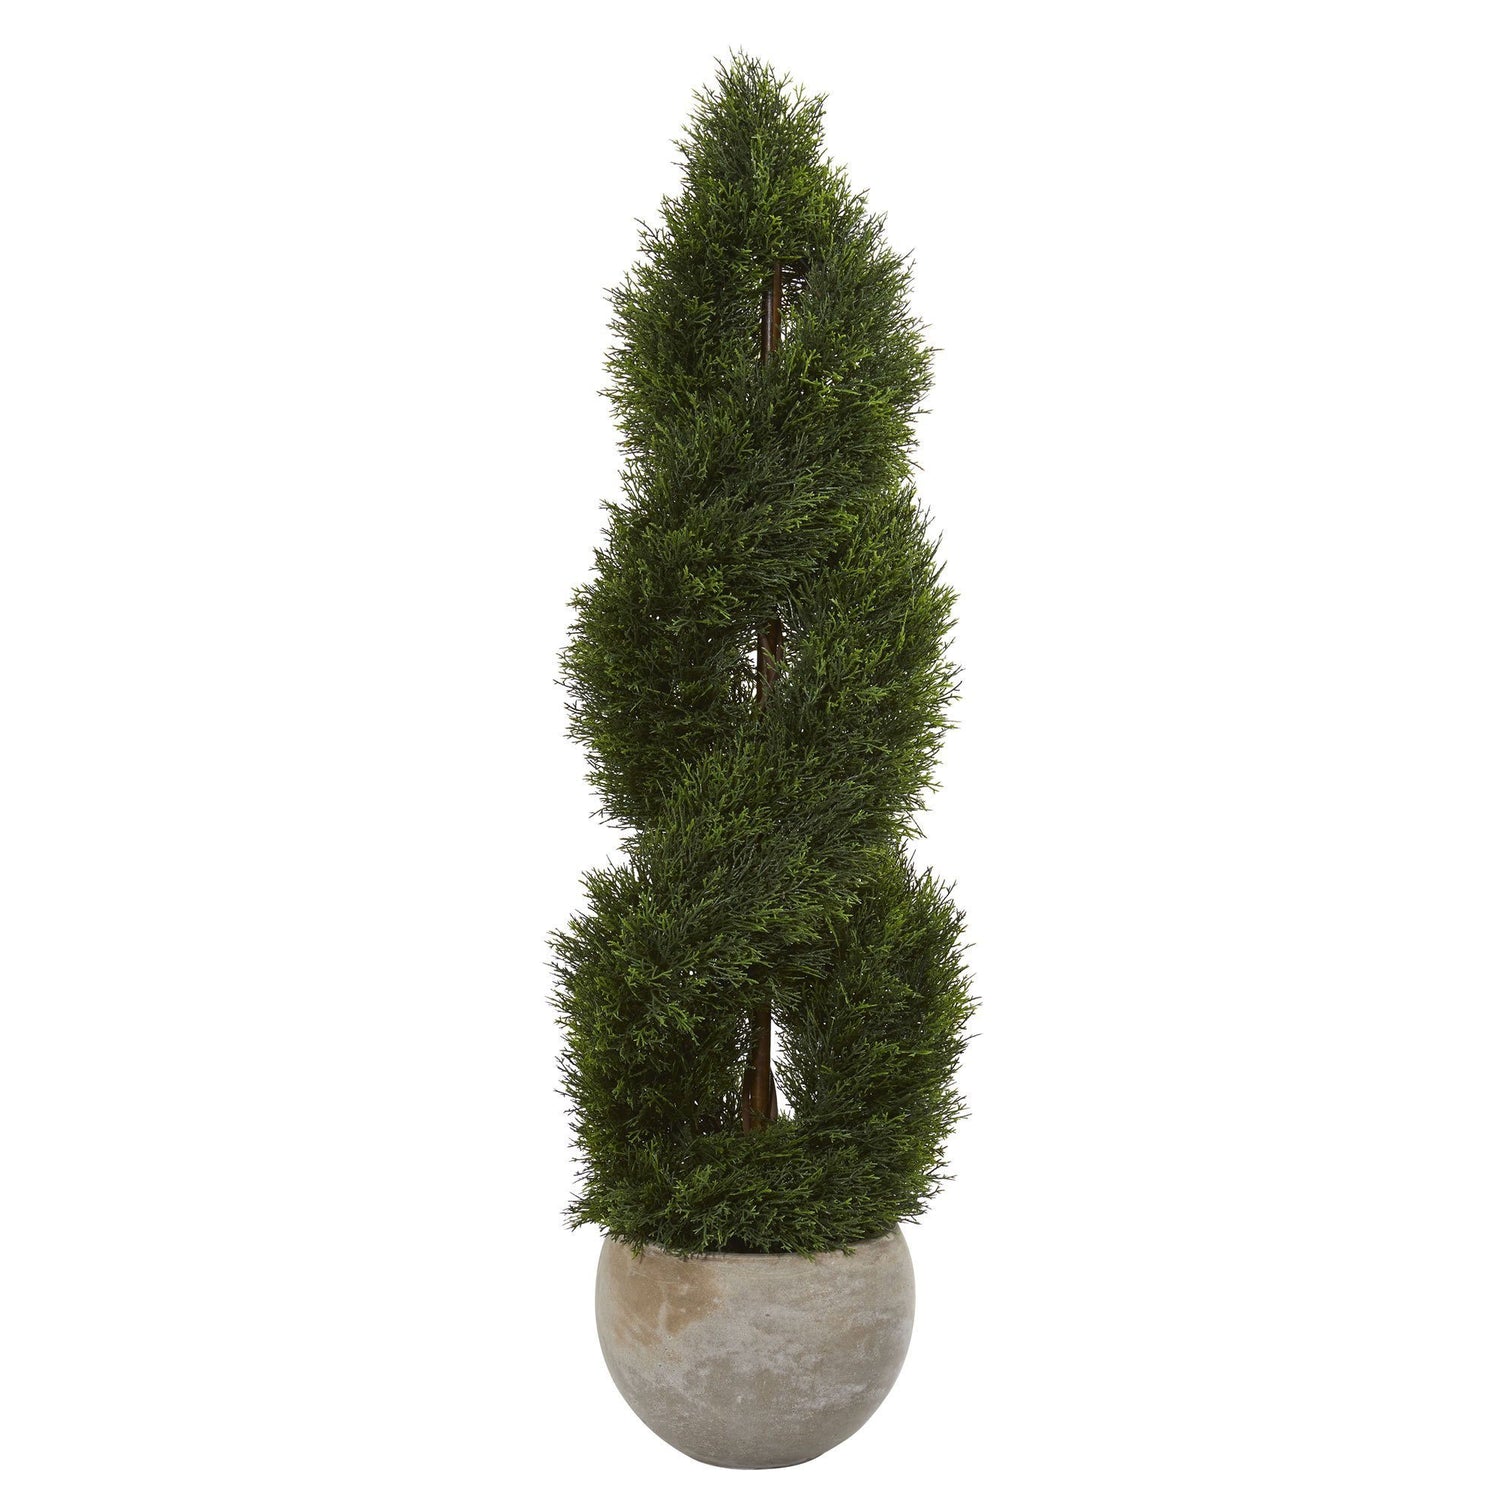 4’ Double Pond Cypress Spiral Artificial Tree in Sand Colored Planter (Indoor/Outdoor)